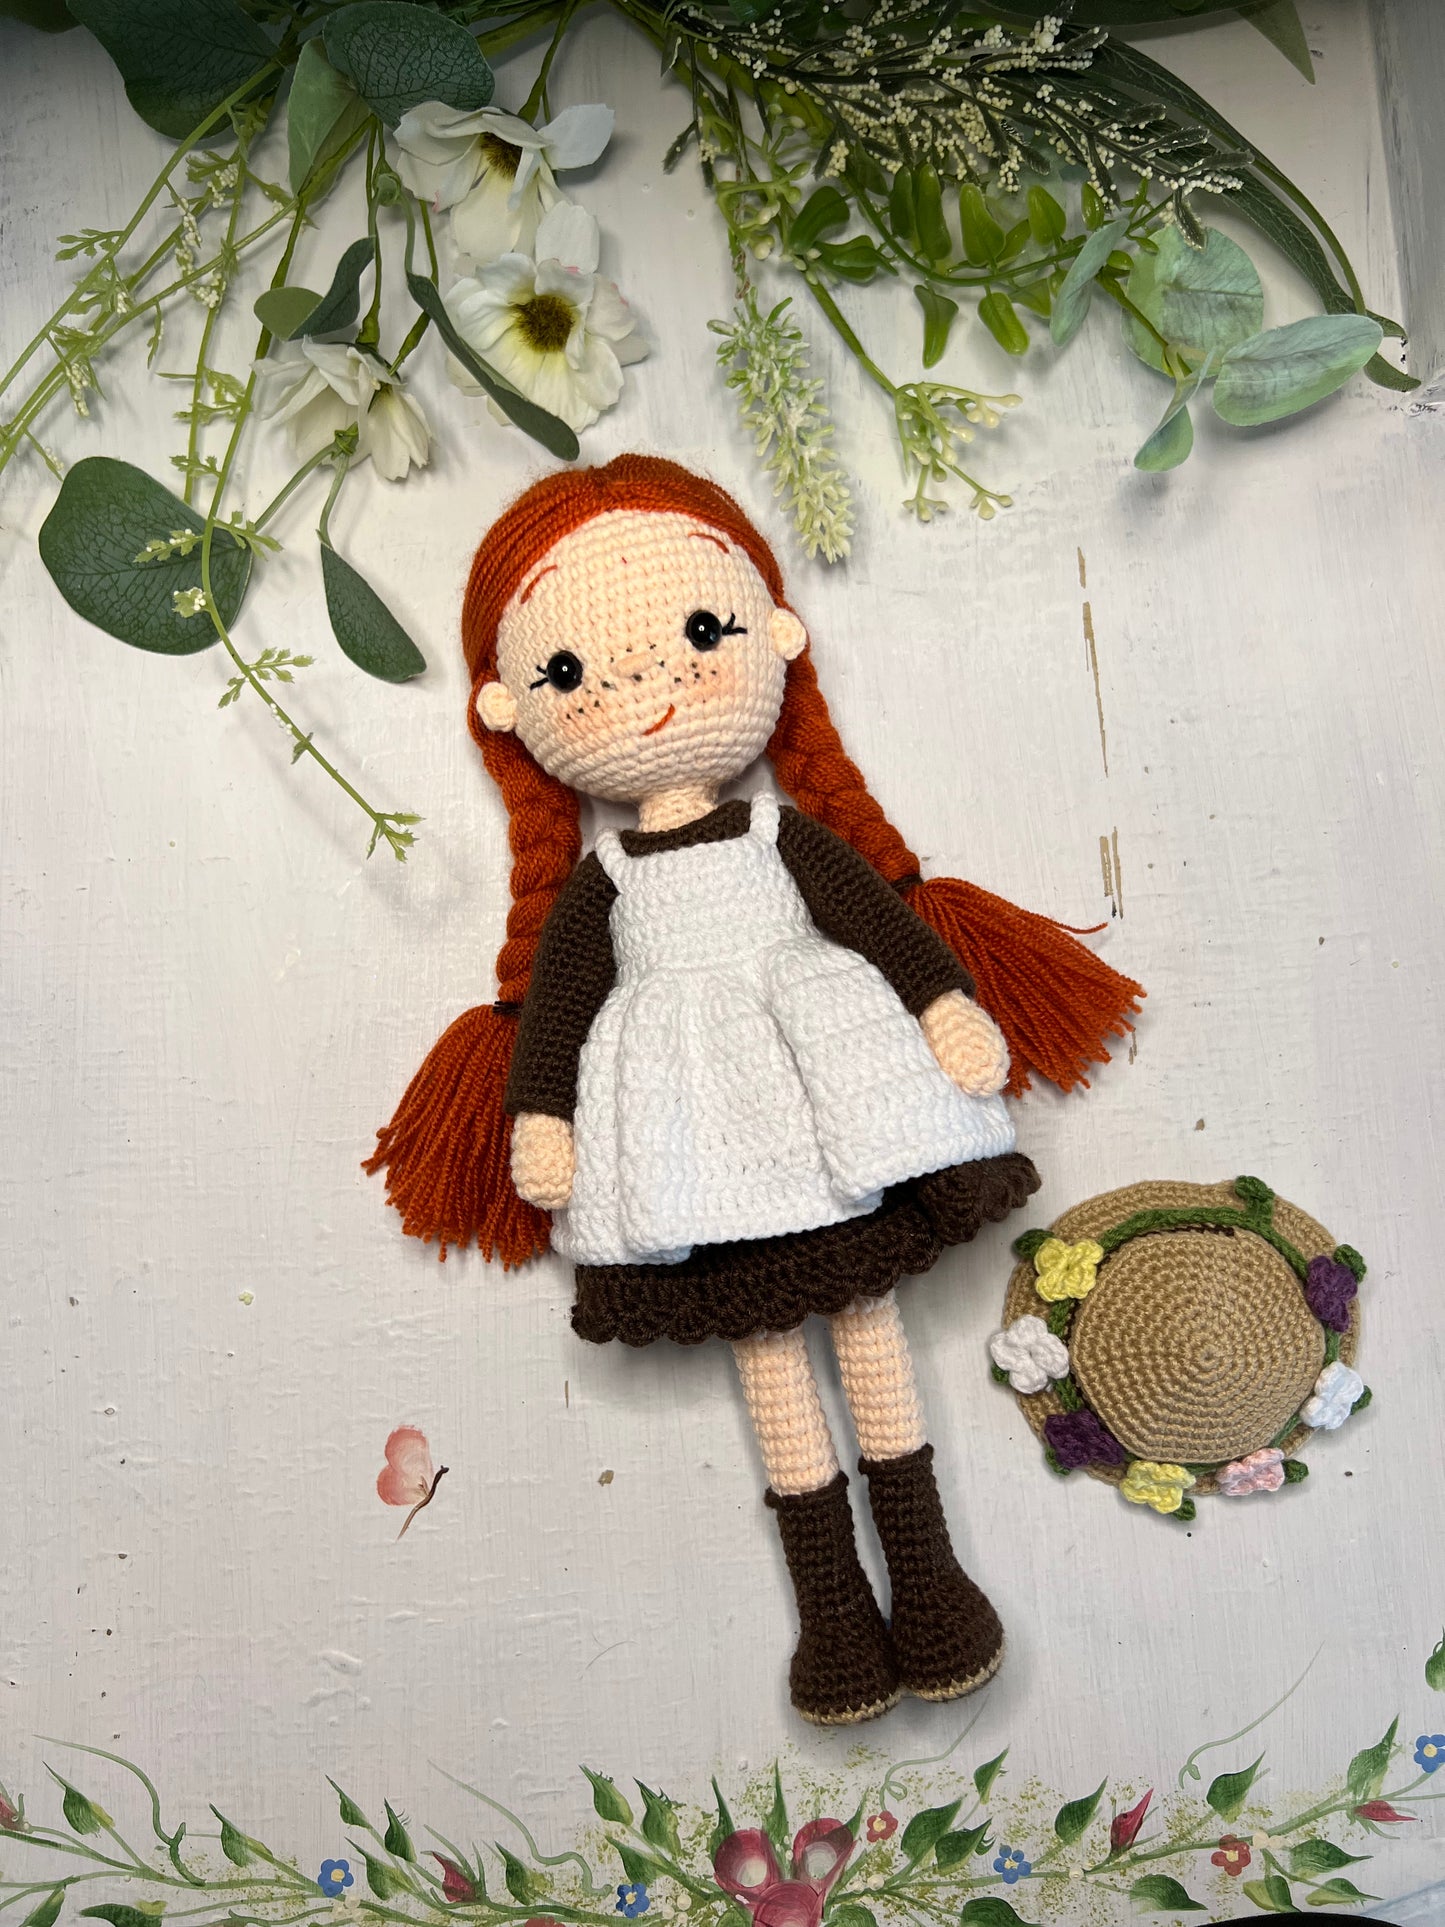 Amigurumi Anne Shirley Handmade Stuffed Doll, Crocheted Doll, Ready Made, Unique Collectibles, Kids Gifts, Artisan Doll, Limited Edition Baby Dolls